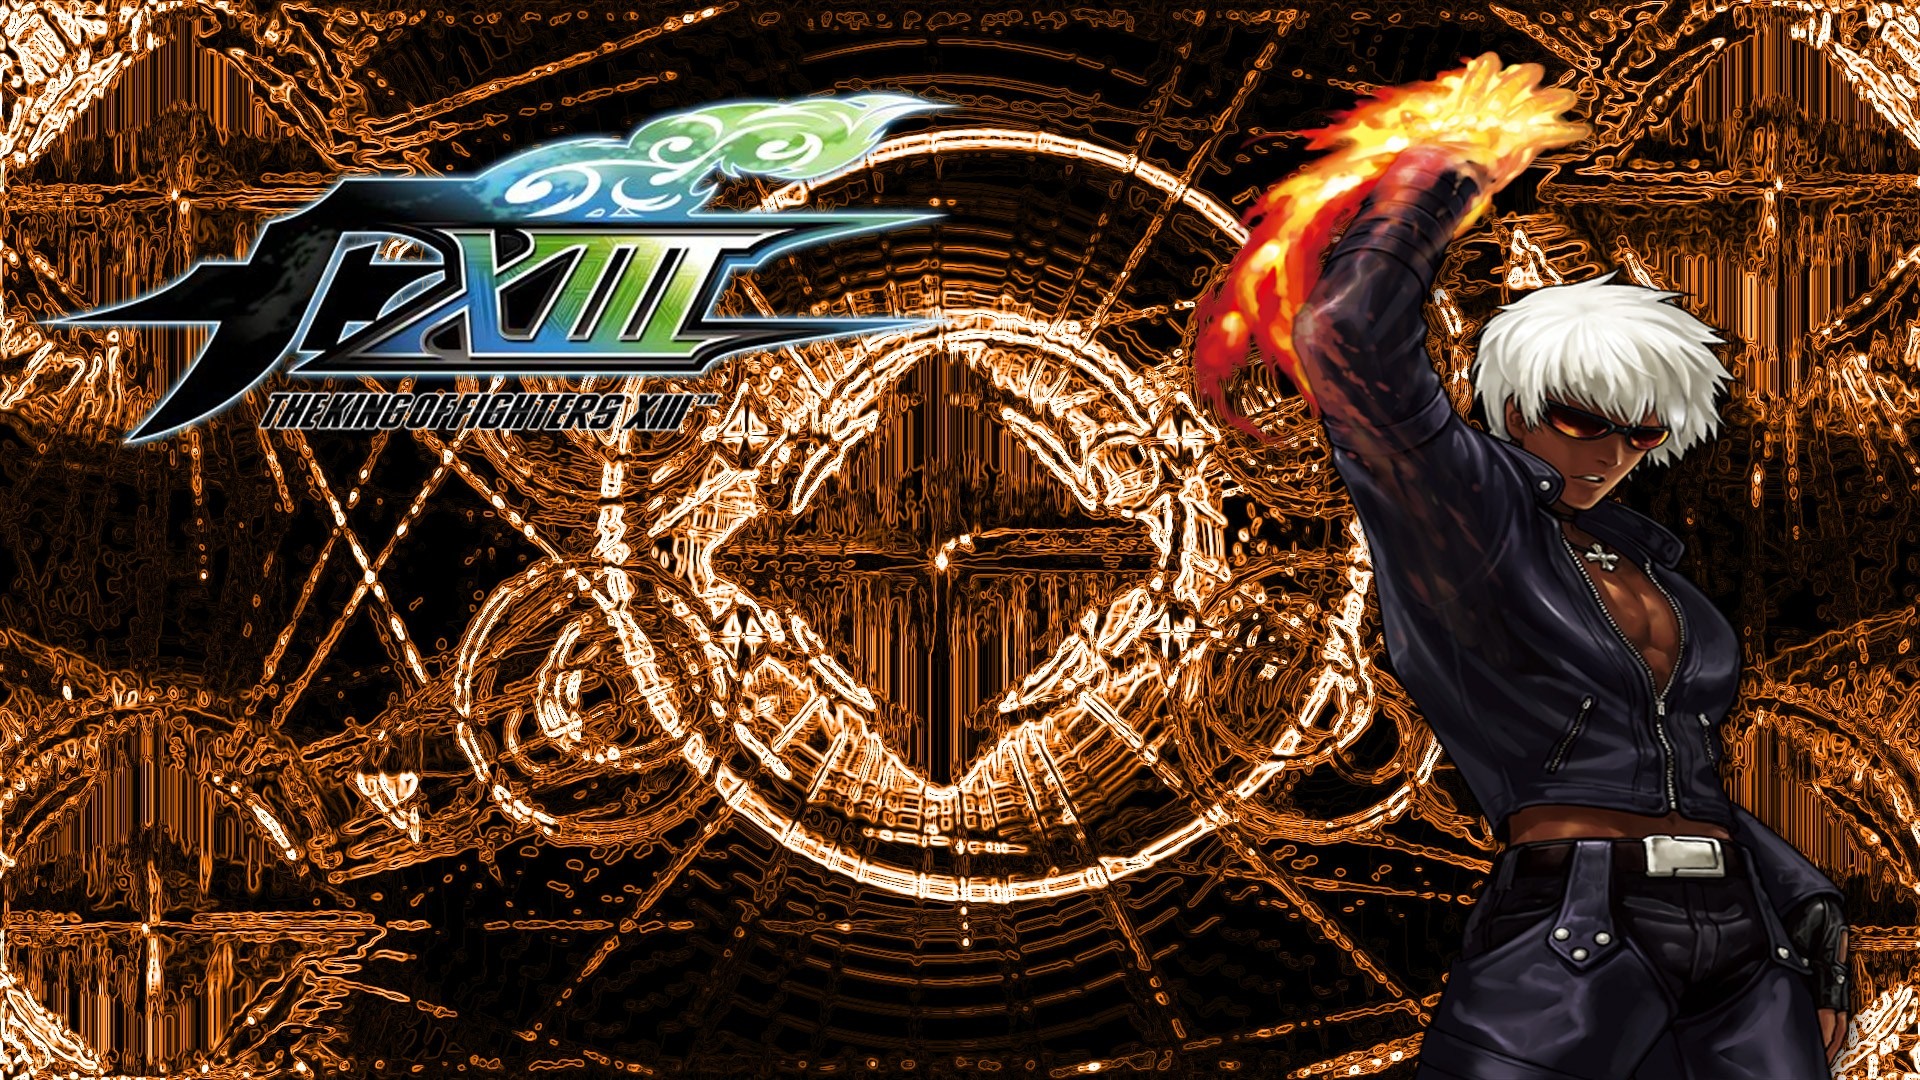 Le roi de wallpapers Fighters XIII #8 - 1920x1080